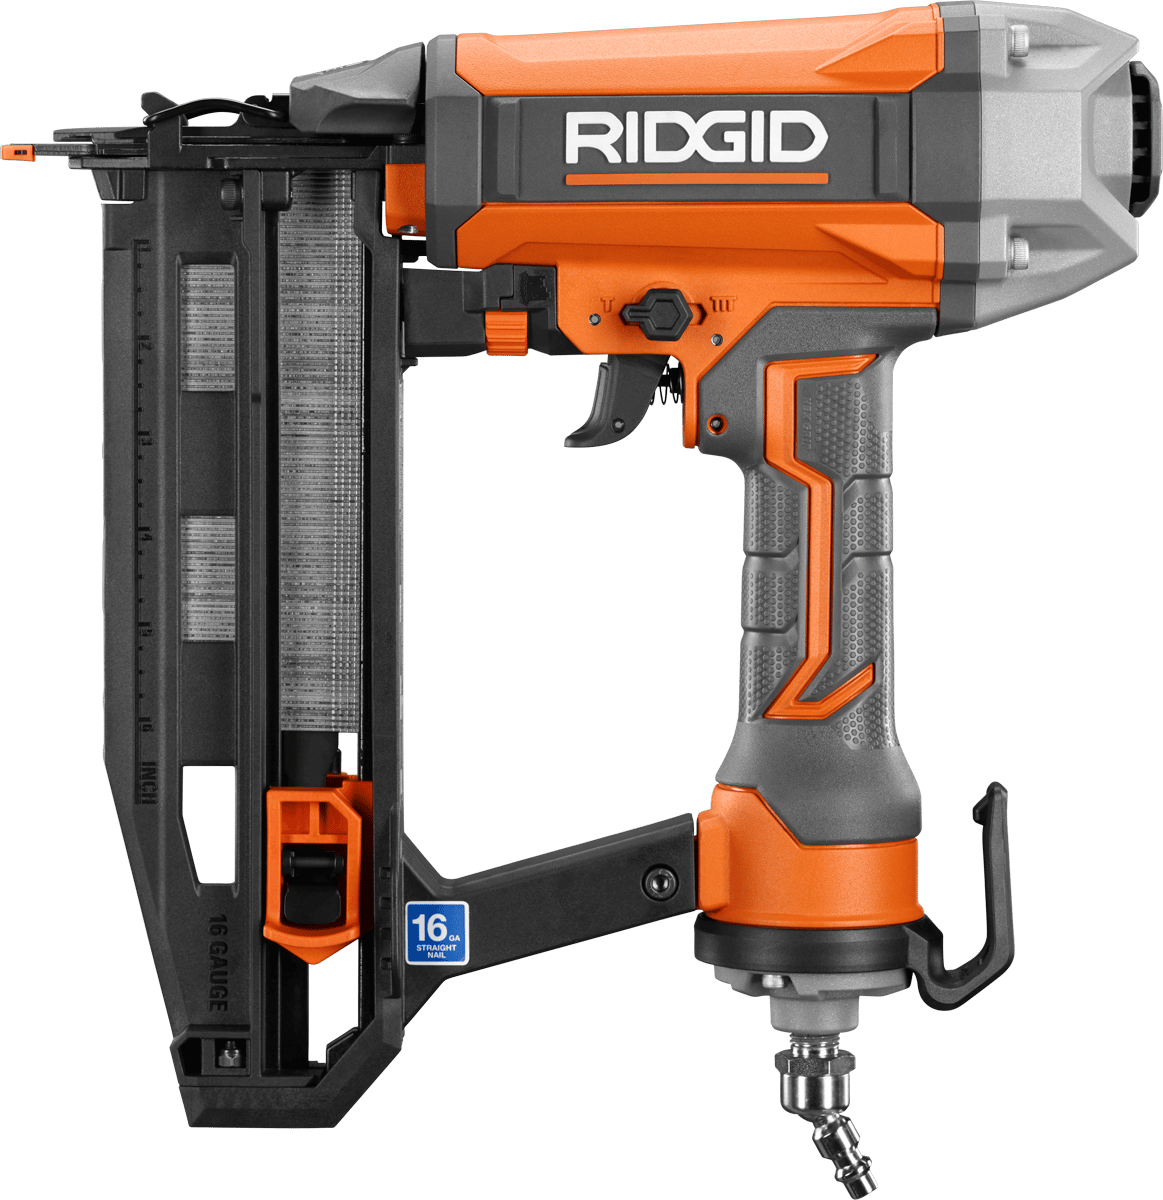 Handheld power drill, Pneumatic tool, Impact wrench, Vehicle, Tire